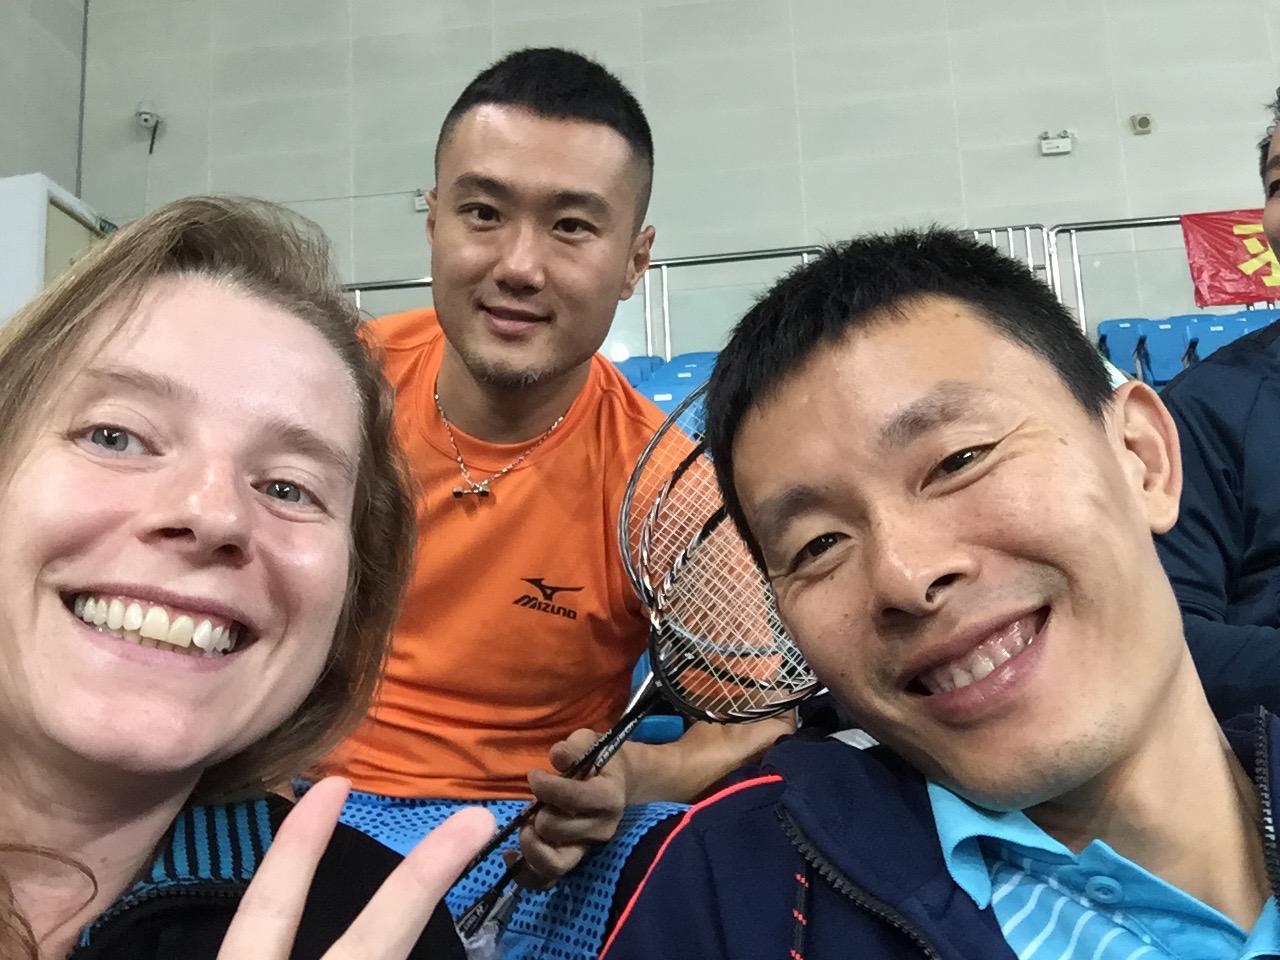 Me, my coach and my friend Yang Ping behind us. Yang Ping is my part-time coach and we train together every Wednesday. 